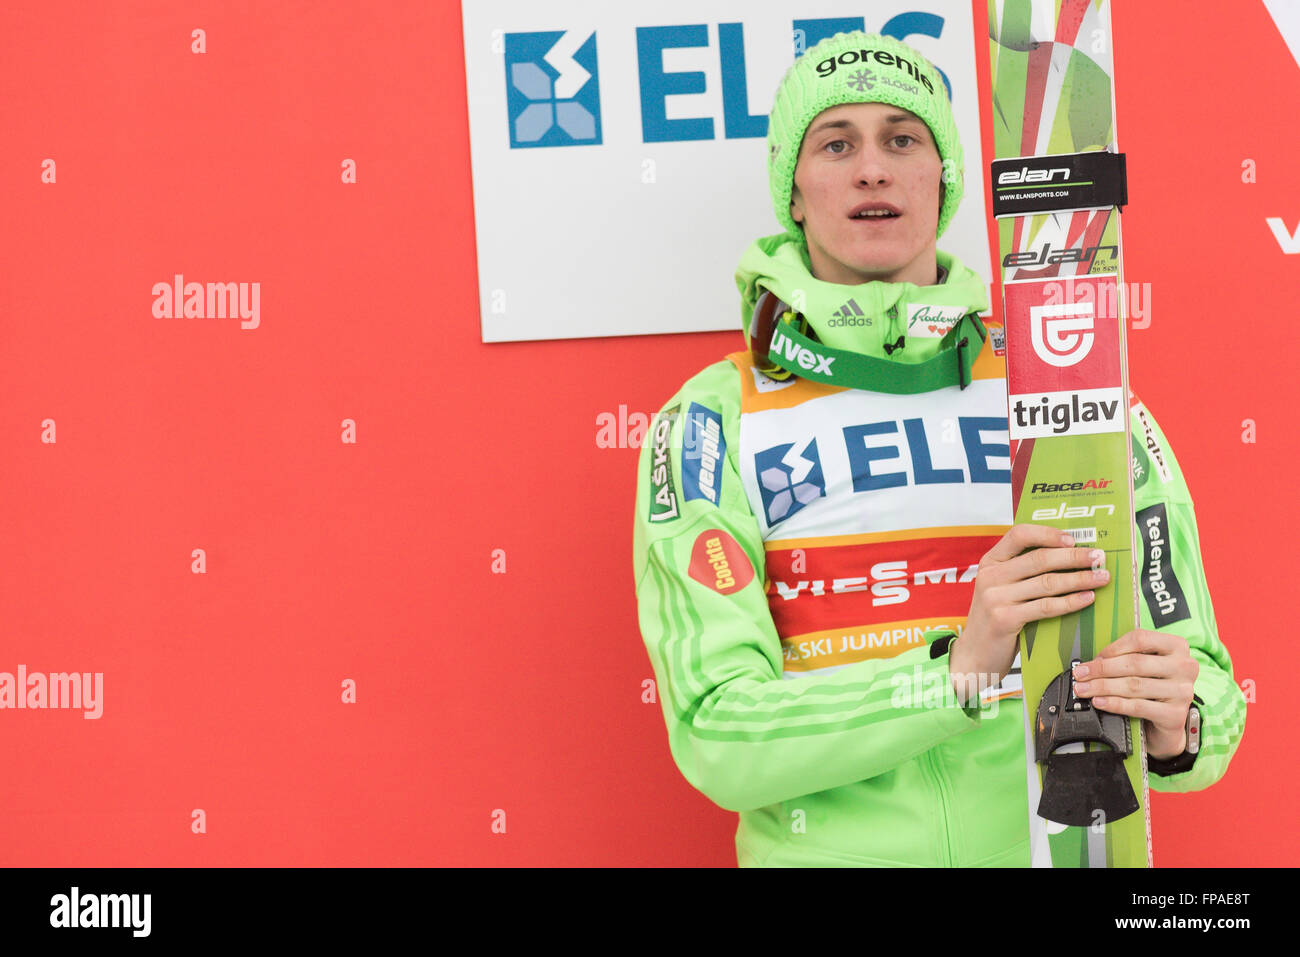 Planica, Slovenia. 18th Mar, 2016. Peter Prevc of Slovenia on podium celebrating his second place at the Planica FIS Ski Jumping World Cup final in Planica, Slovenia on March 18, 2016. © Rok Rakun/Pacific Press/Alamy Live News Stock Photo